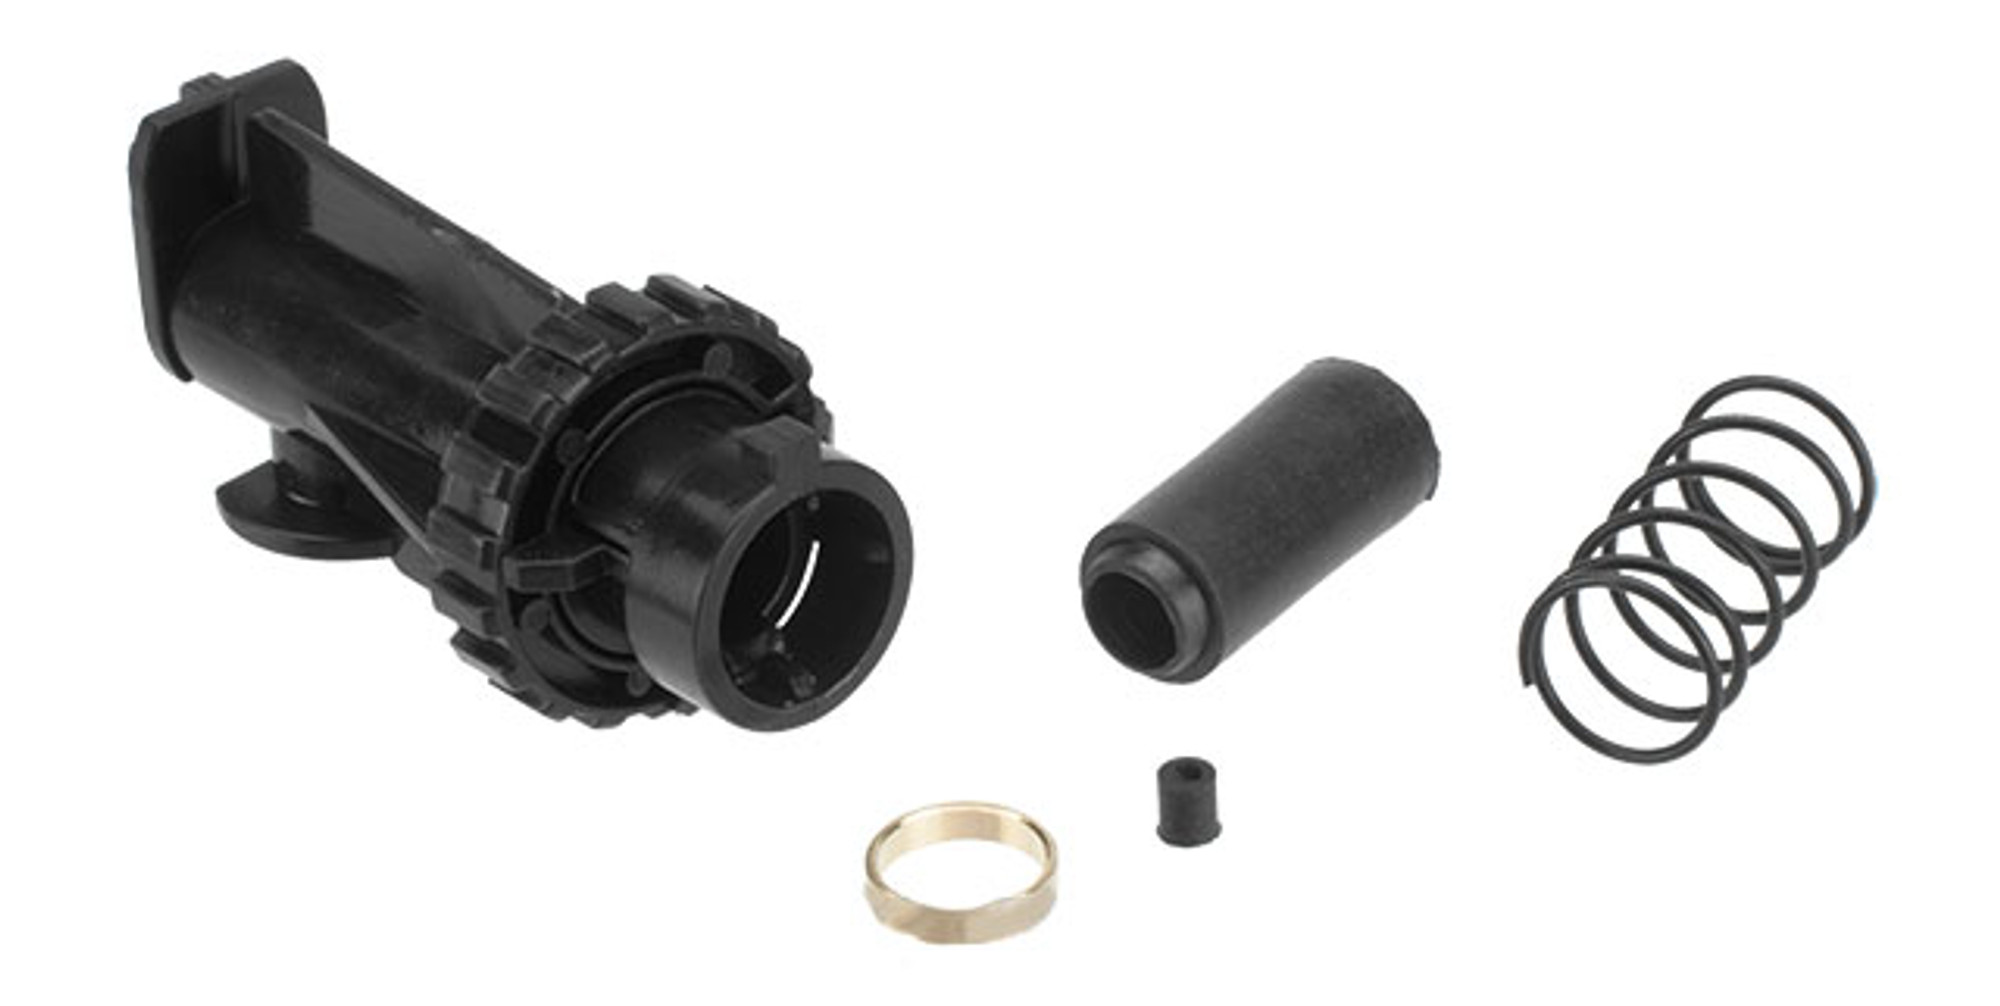 JG OEM Complete Hopup Chamber / System for P90 / E90 Series Airsoft AEG Rifles